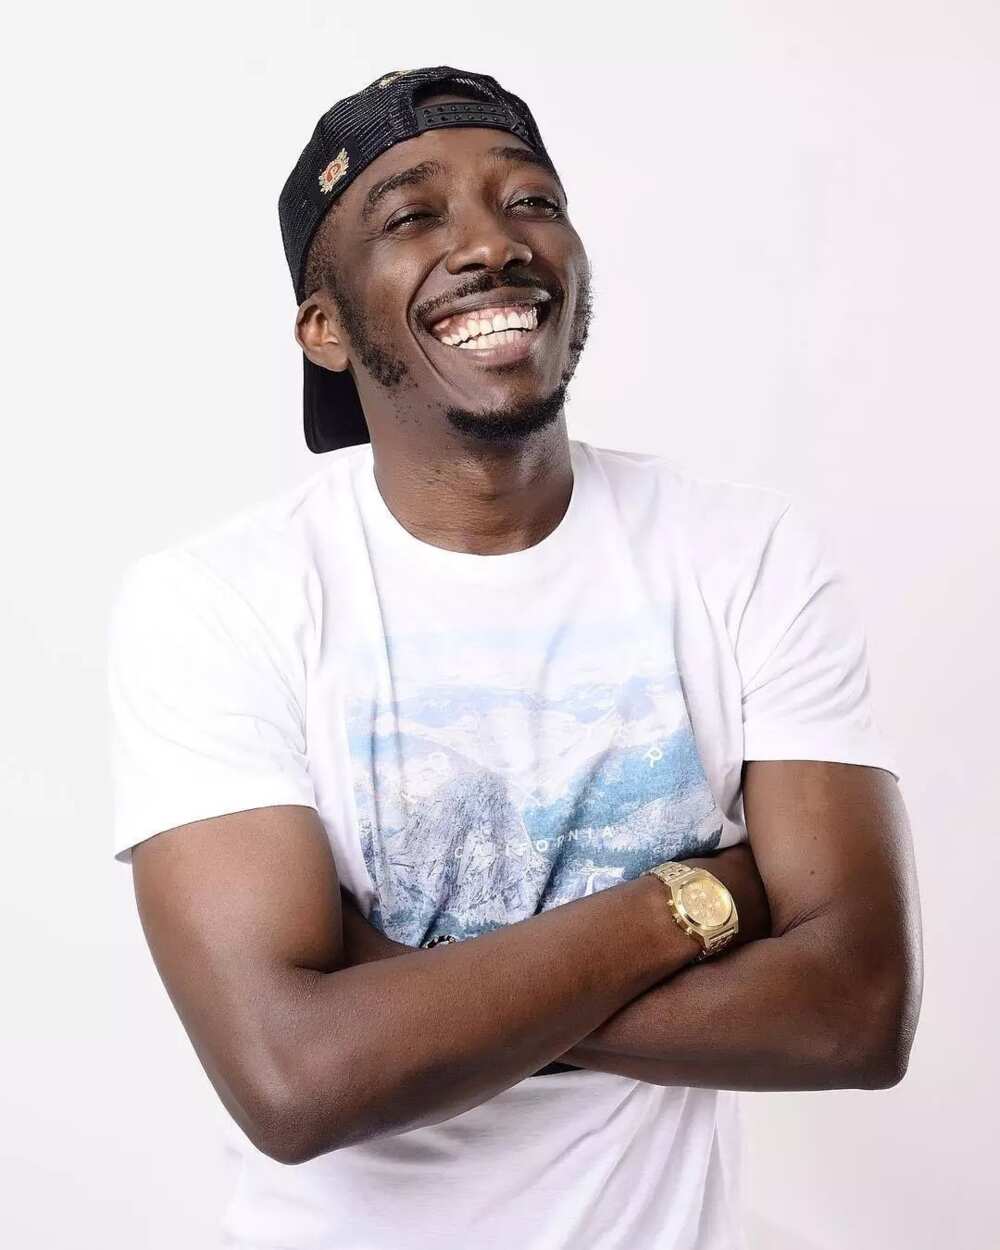 Bovi shares important tips for success